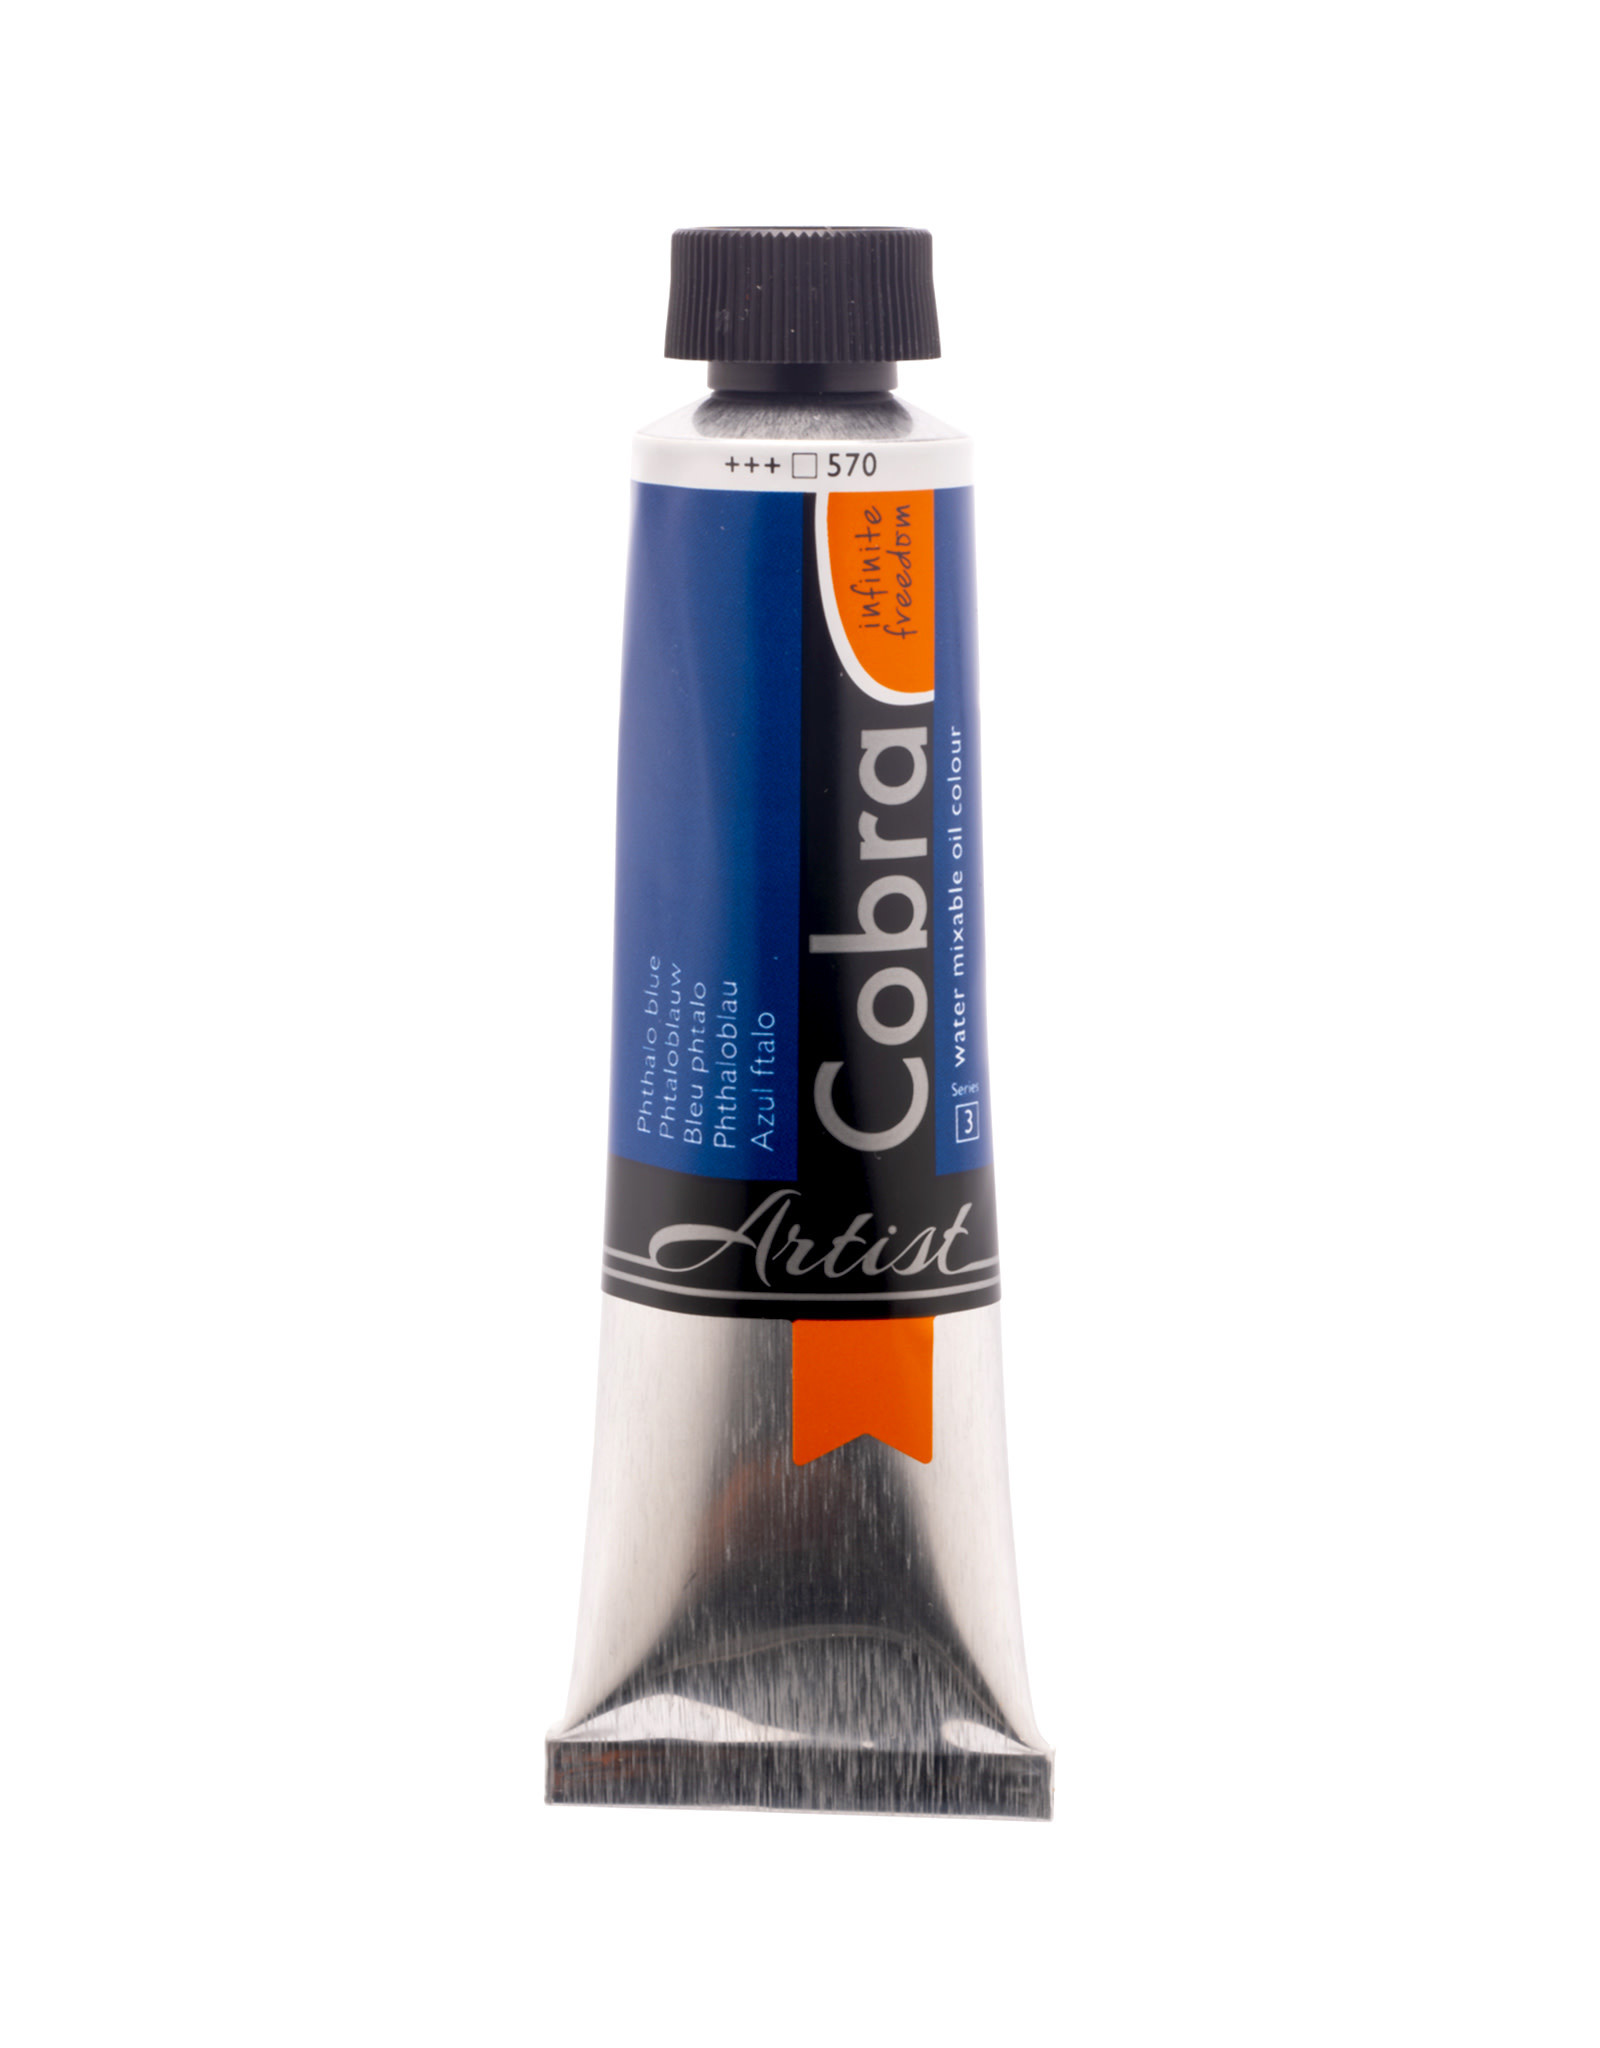 Royal Talens Cobra Water Mixable Artist Oils,  Phthalo Blue 40ml